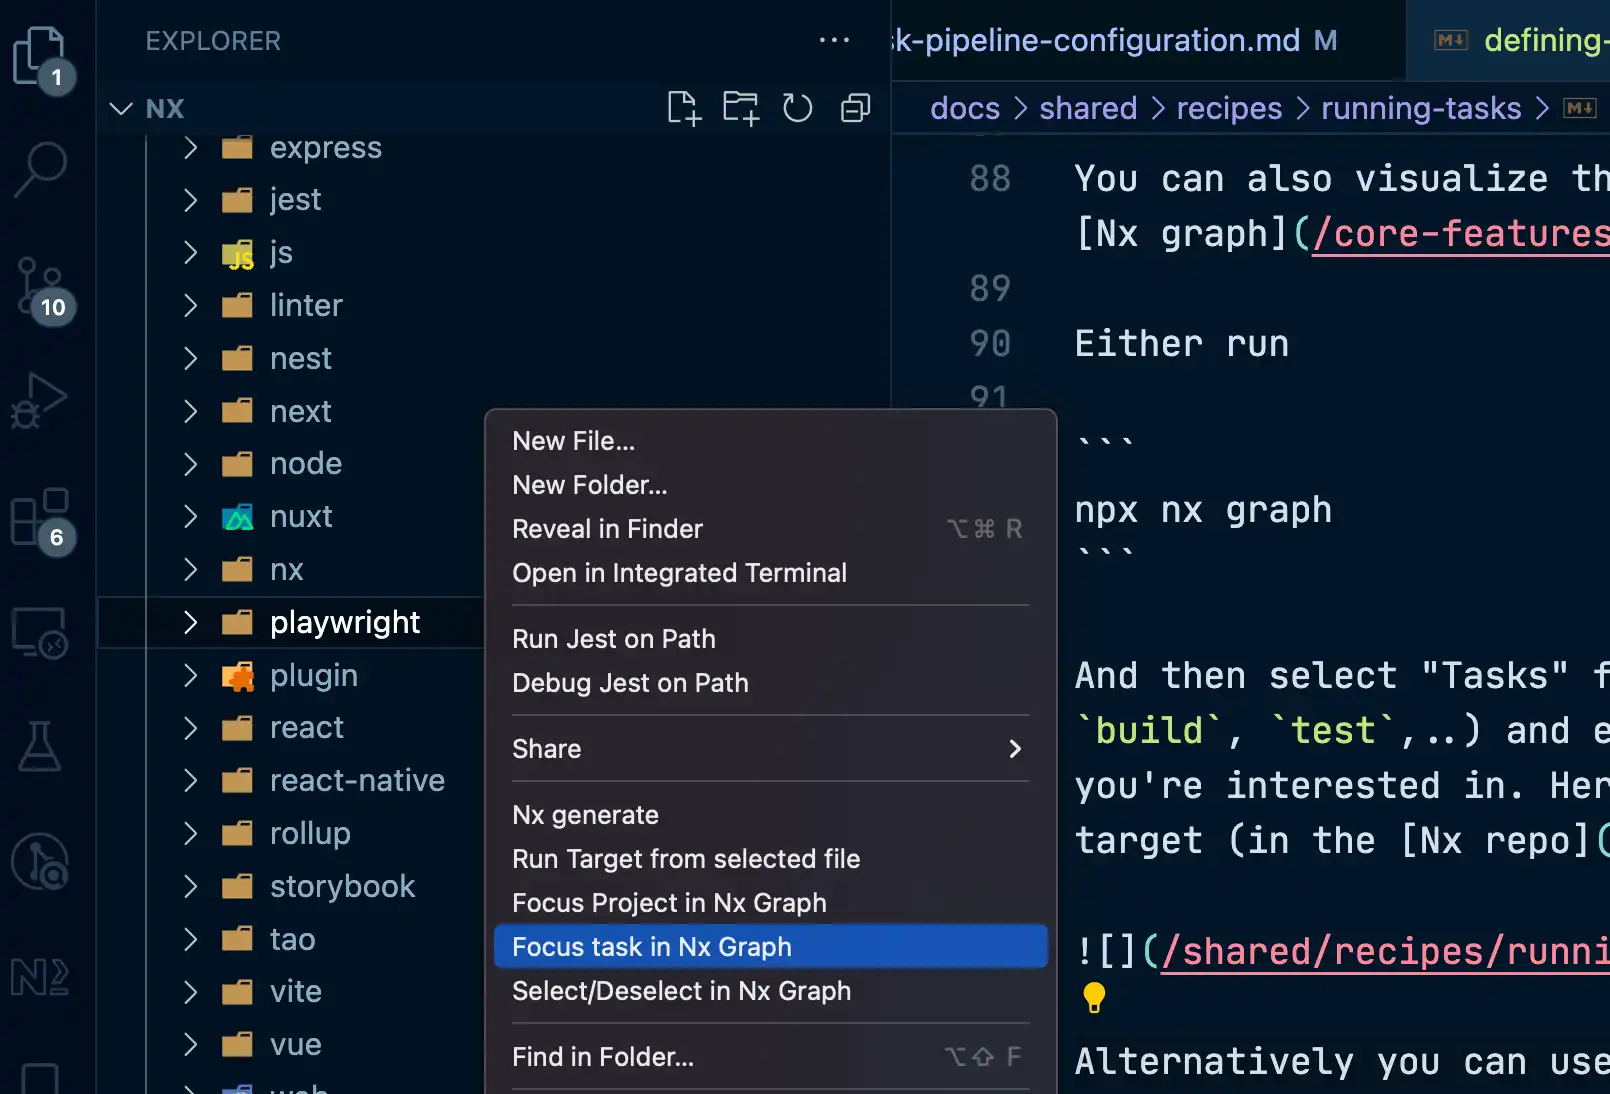 Selecting "Focus task in Nx Graph" from the context menu in VS Code